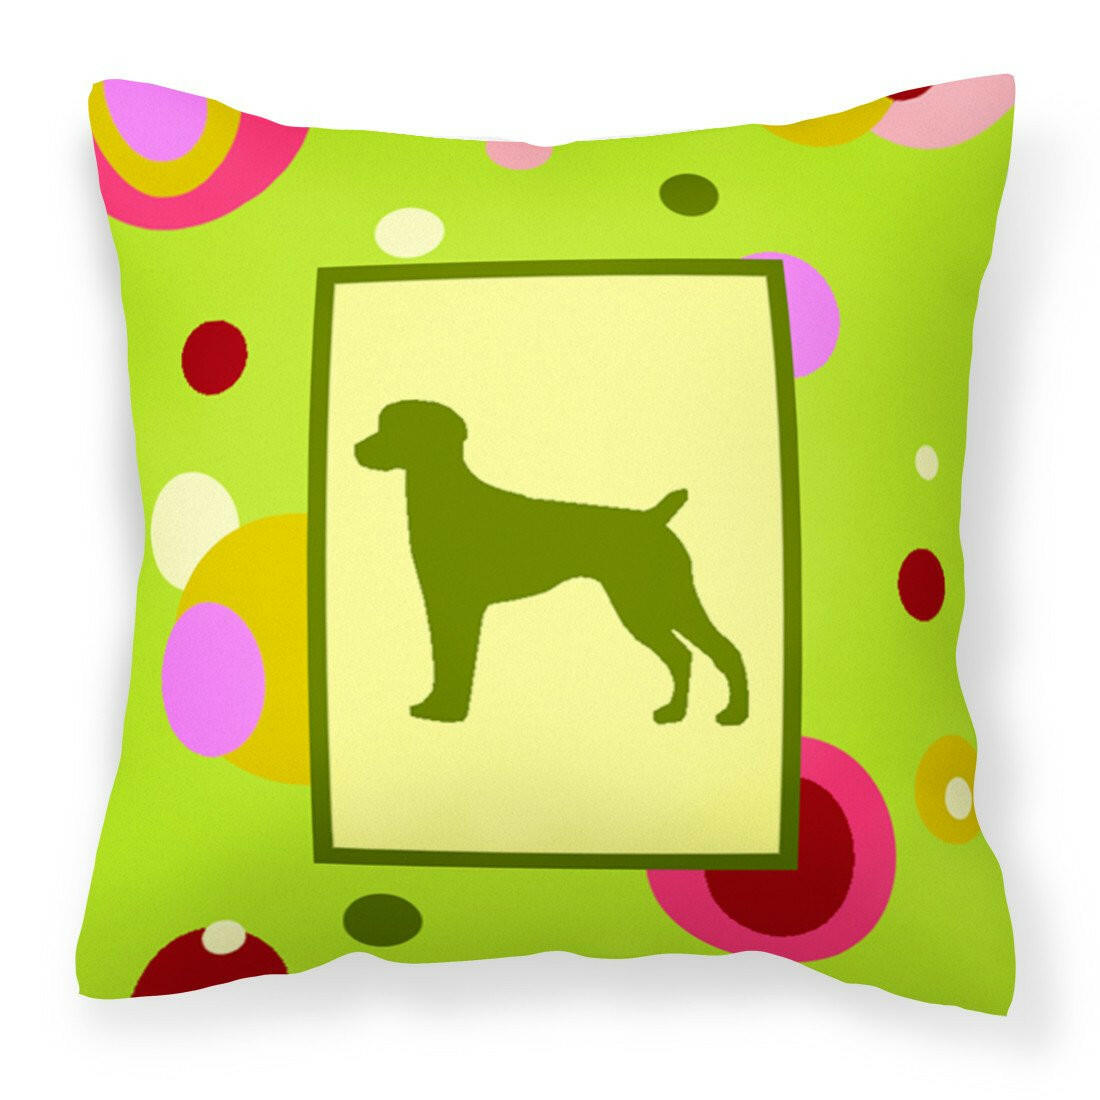 Lime Green Dots German Shorthaired Pointer Fabric Decorative Pillow CK1035PW1414 by Caroline's Treasures